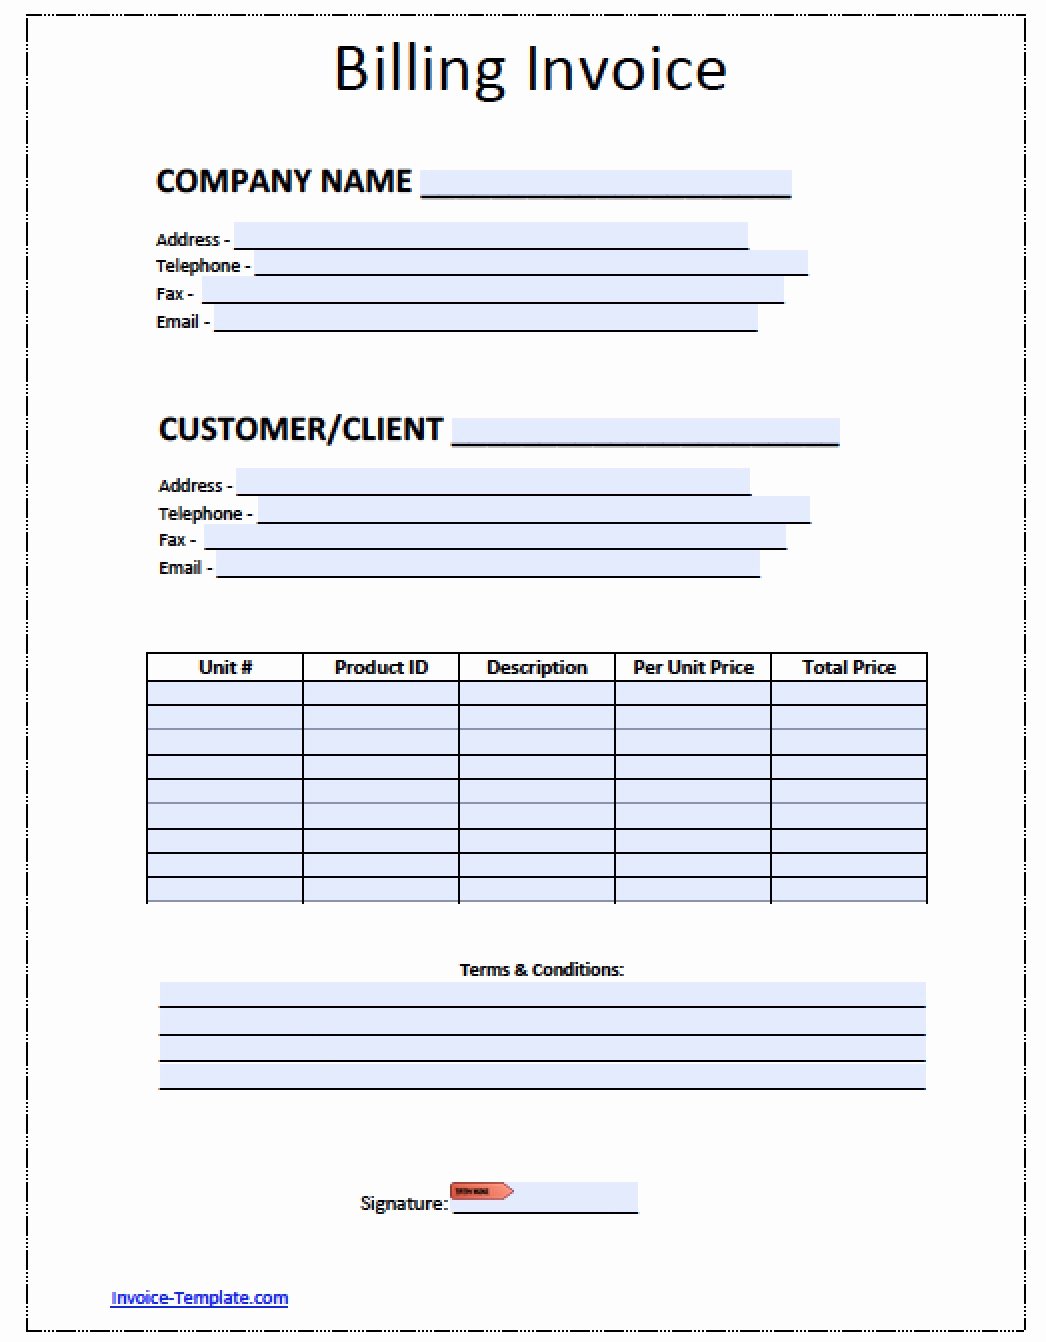 Billing Invoice Template Word Luxury Free Billing Invoice Template Excel Pdf